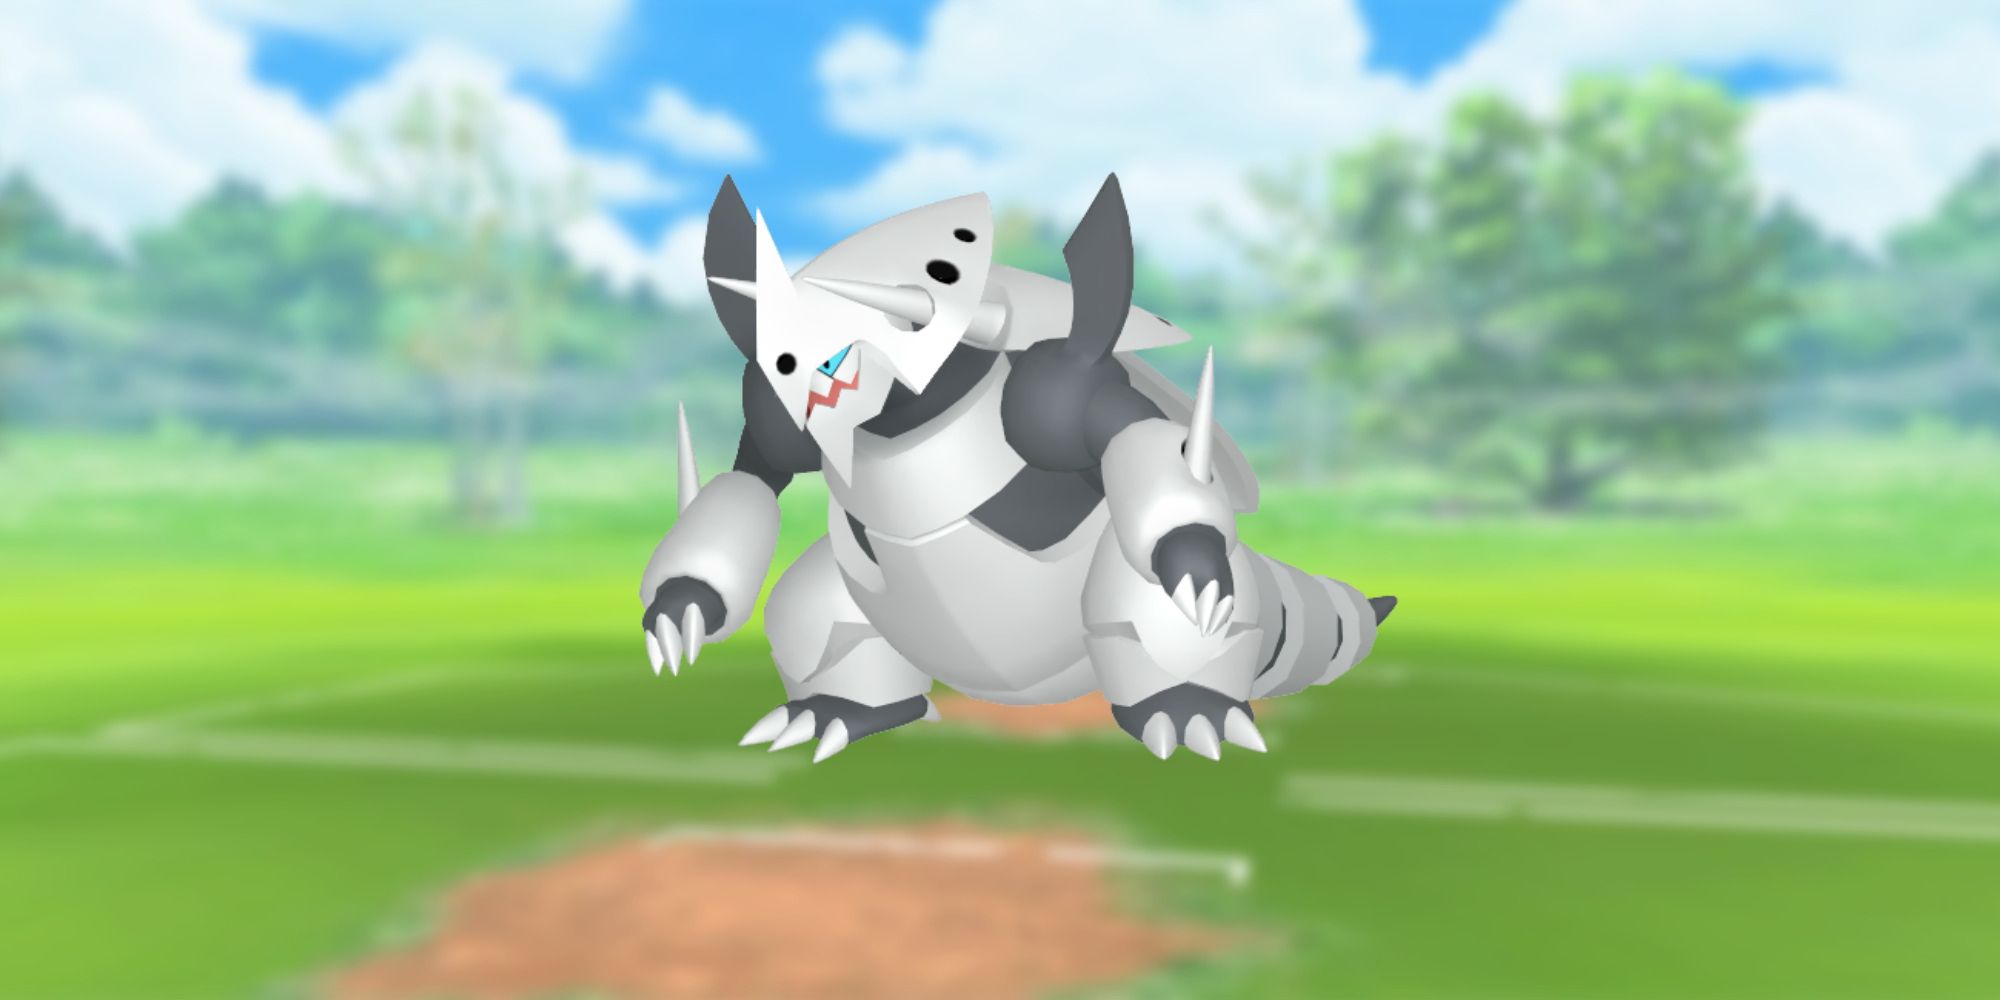 Mega Aggron from Pokemon with the Pokemon Go battlefield as the background